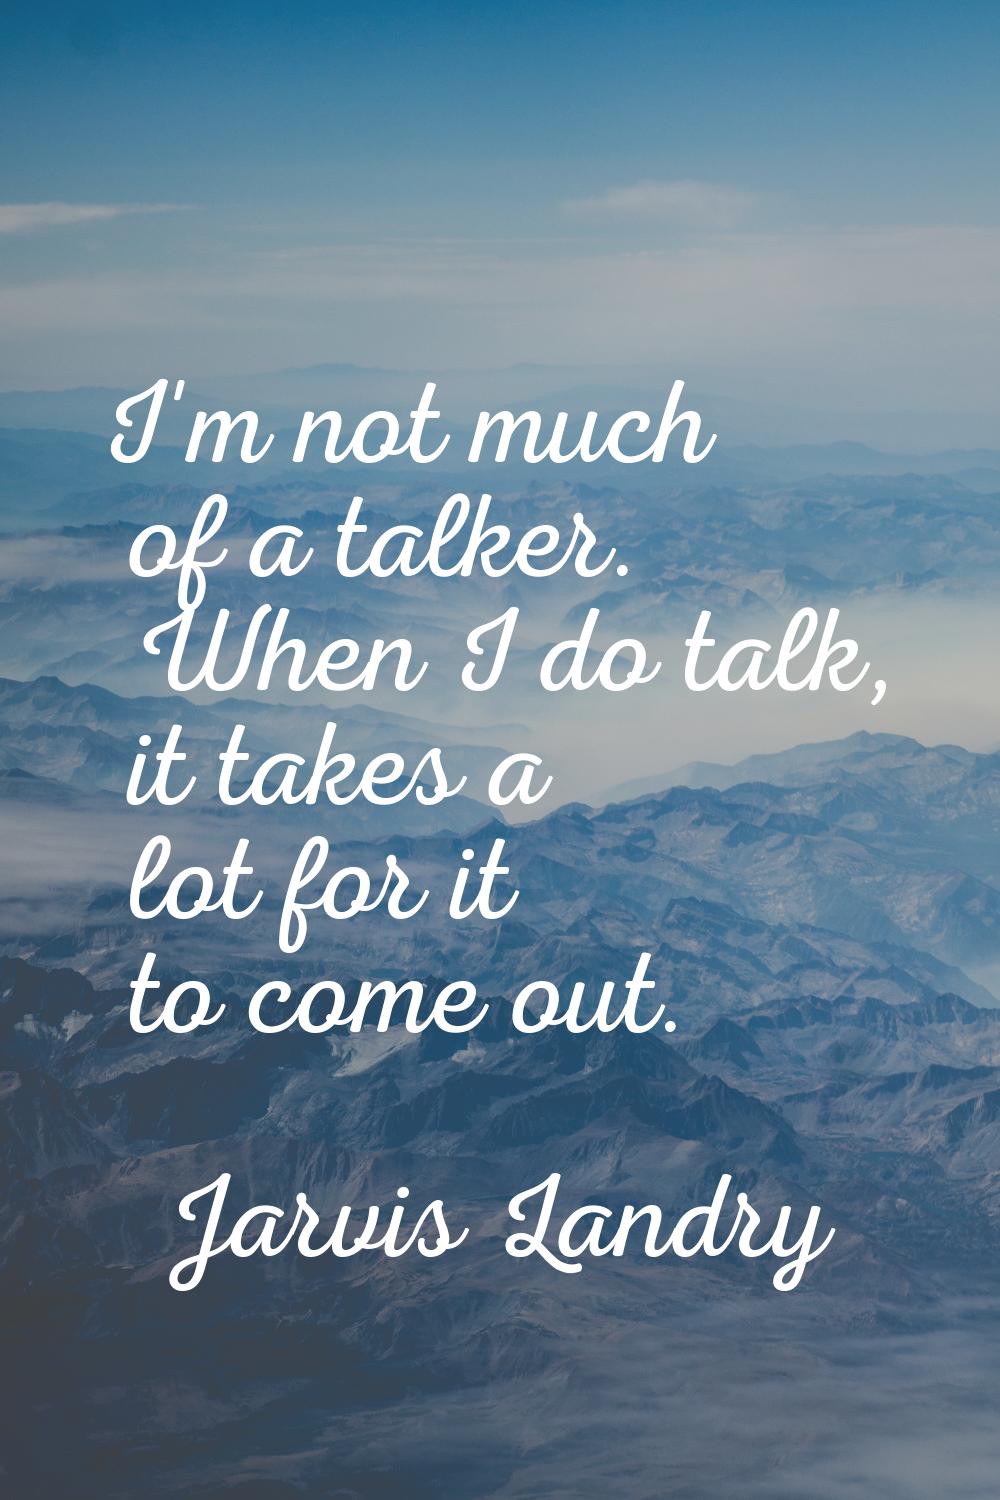 I'm not much of a talker. When I do talk, it takes a lot for it to come out.